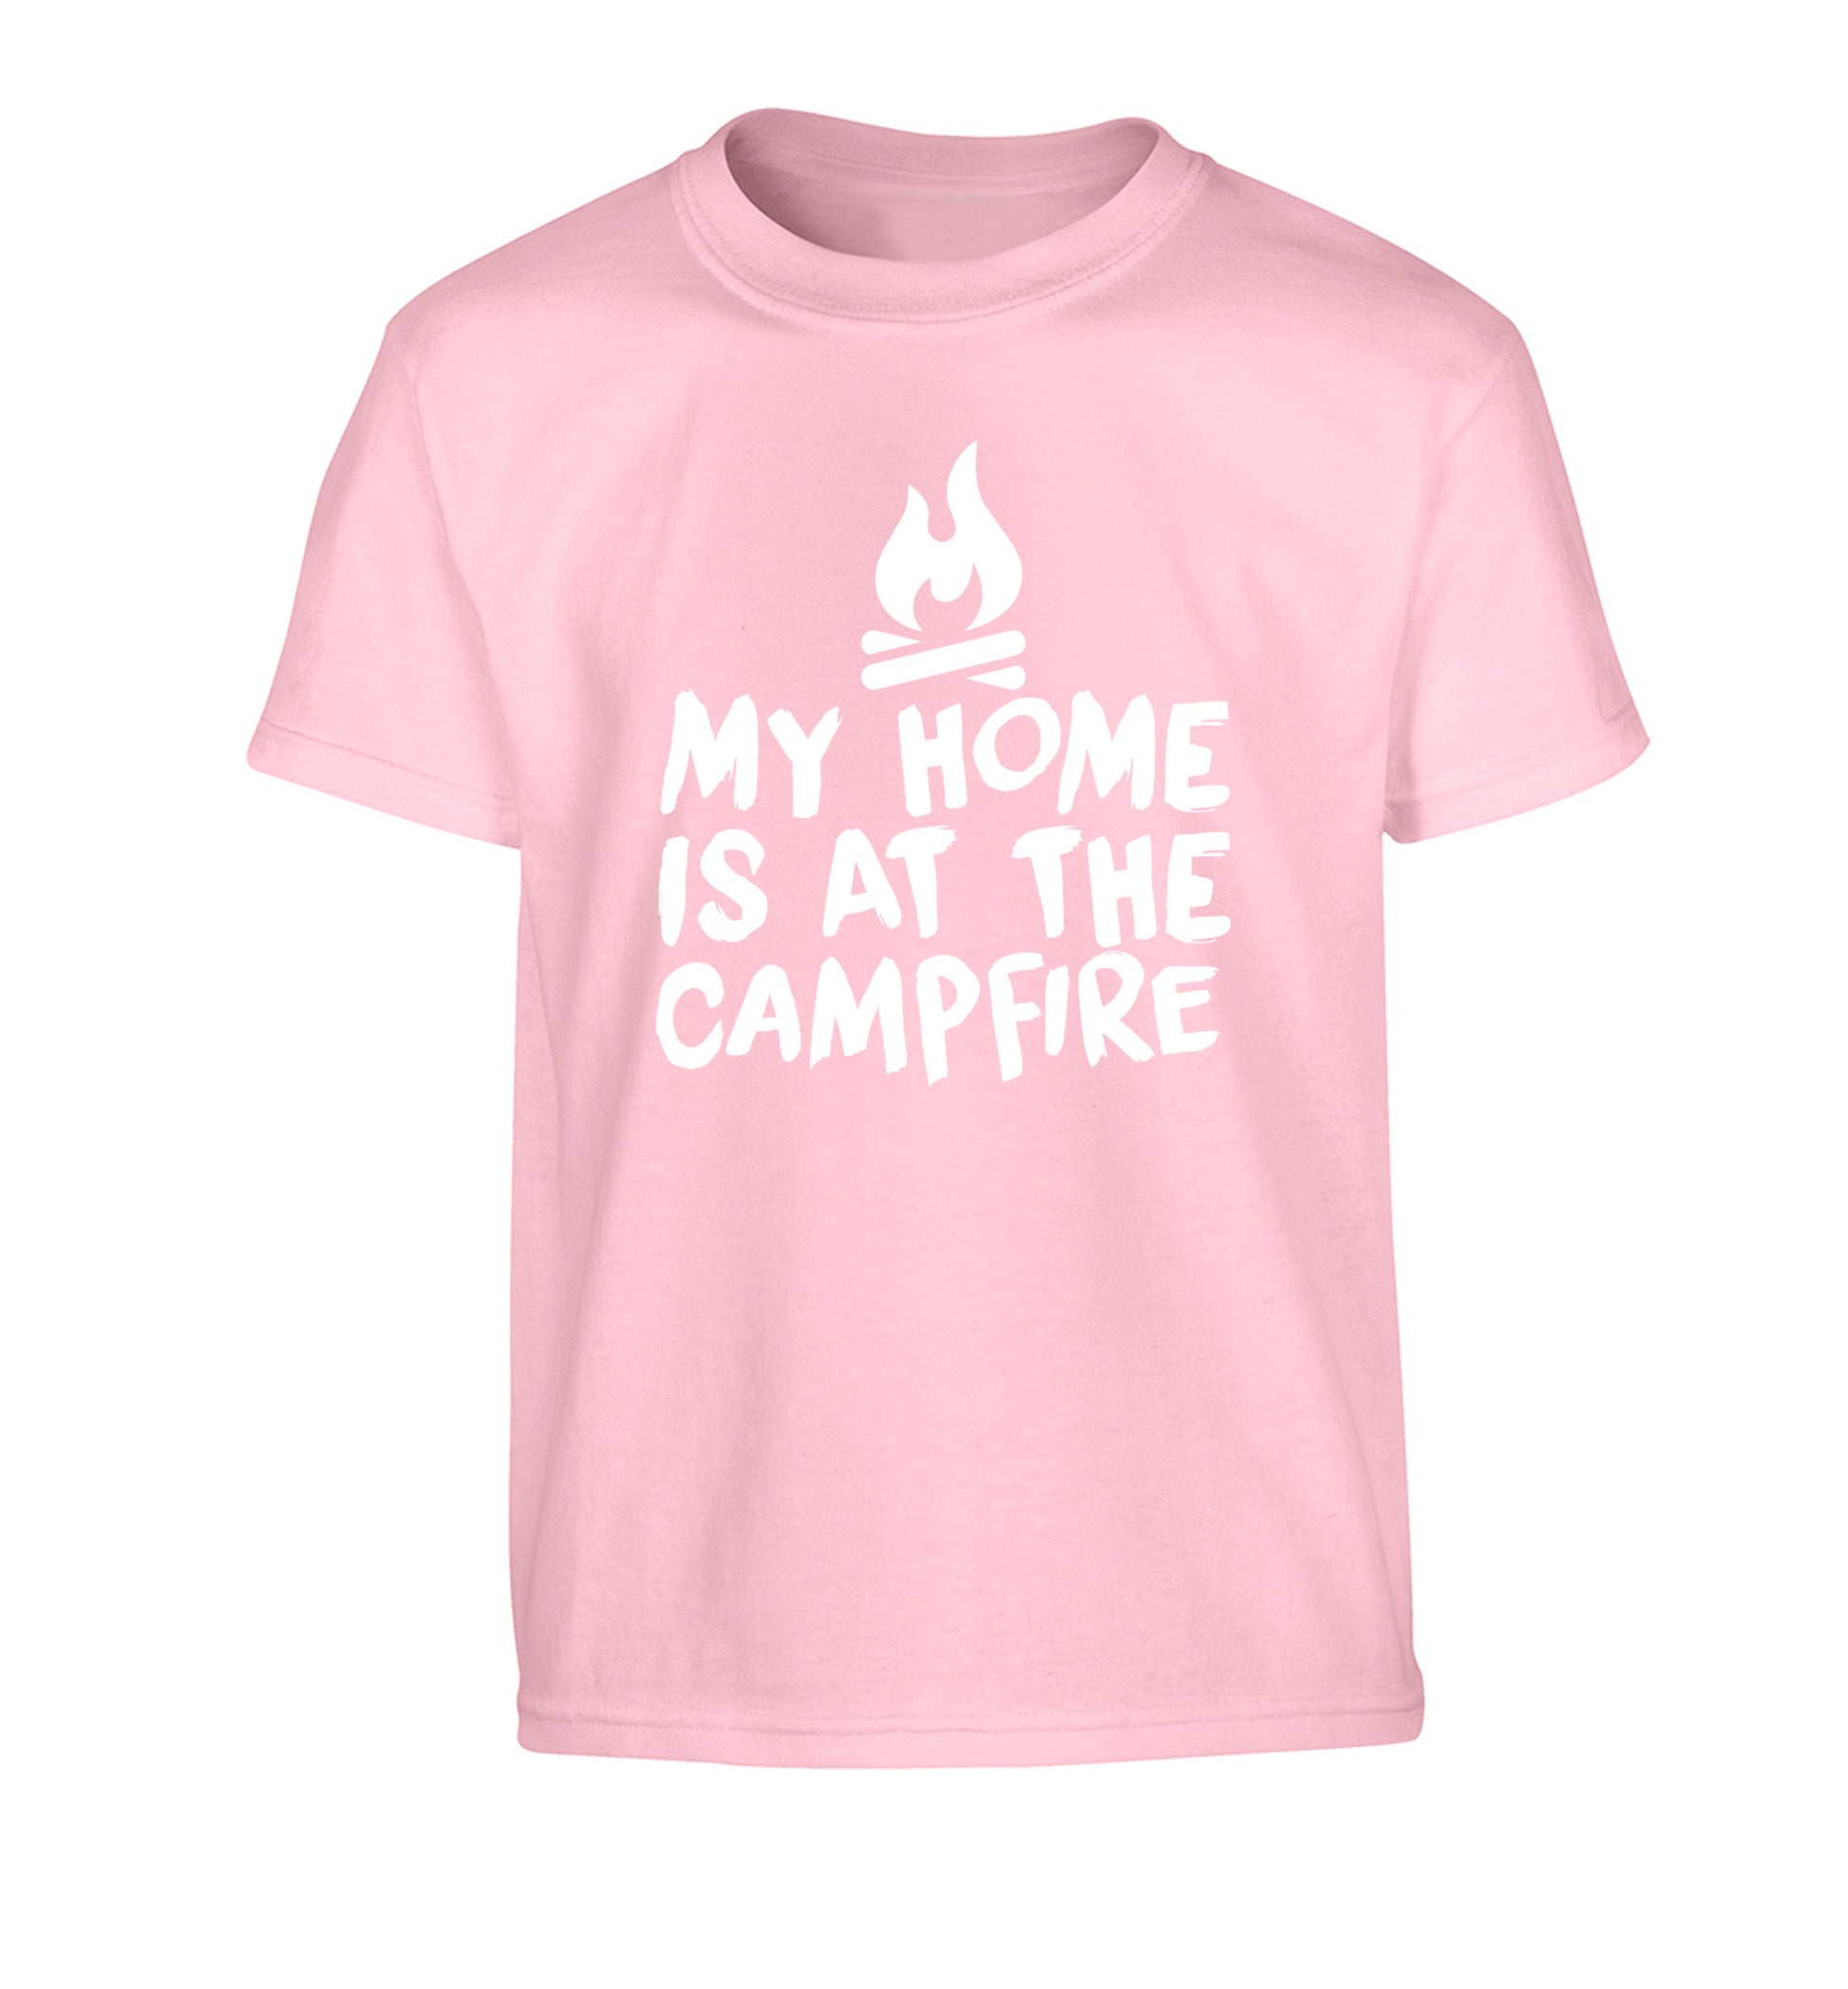 My home is at the campfire Children's light pink Tshirt 12-14 Years